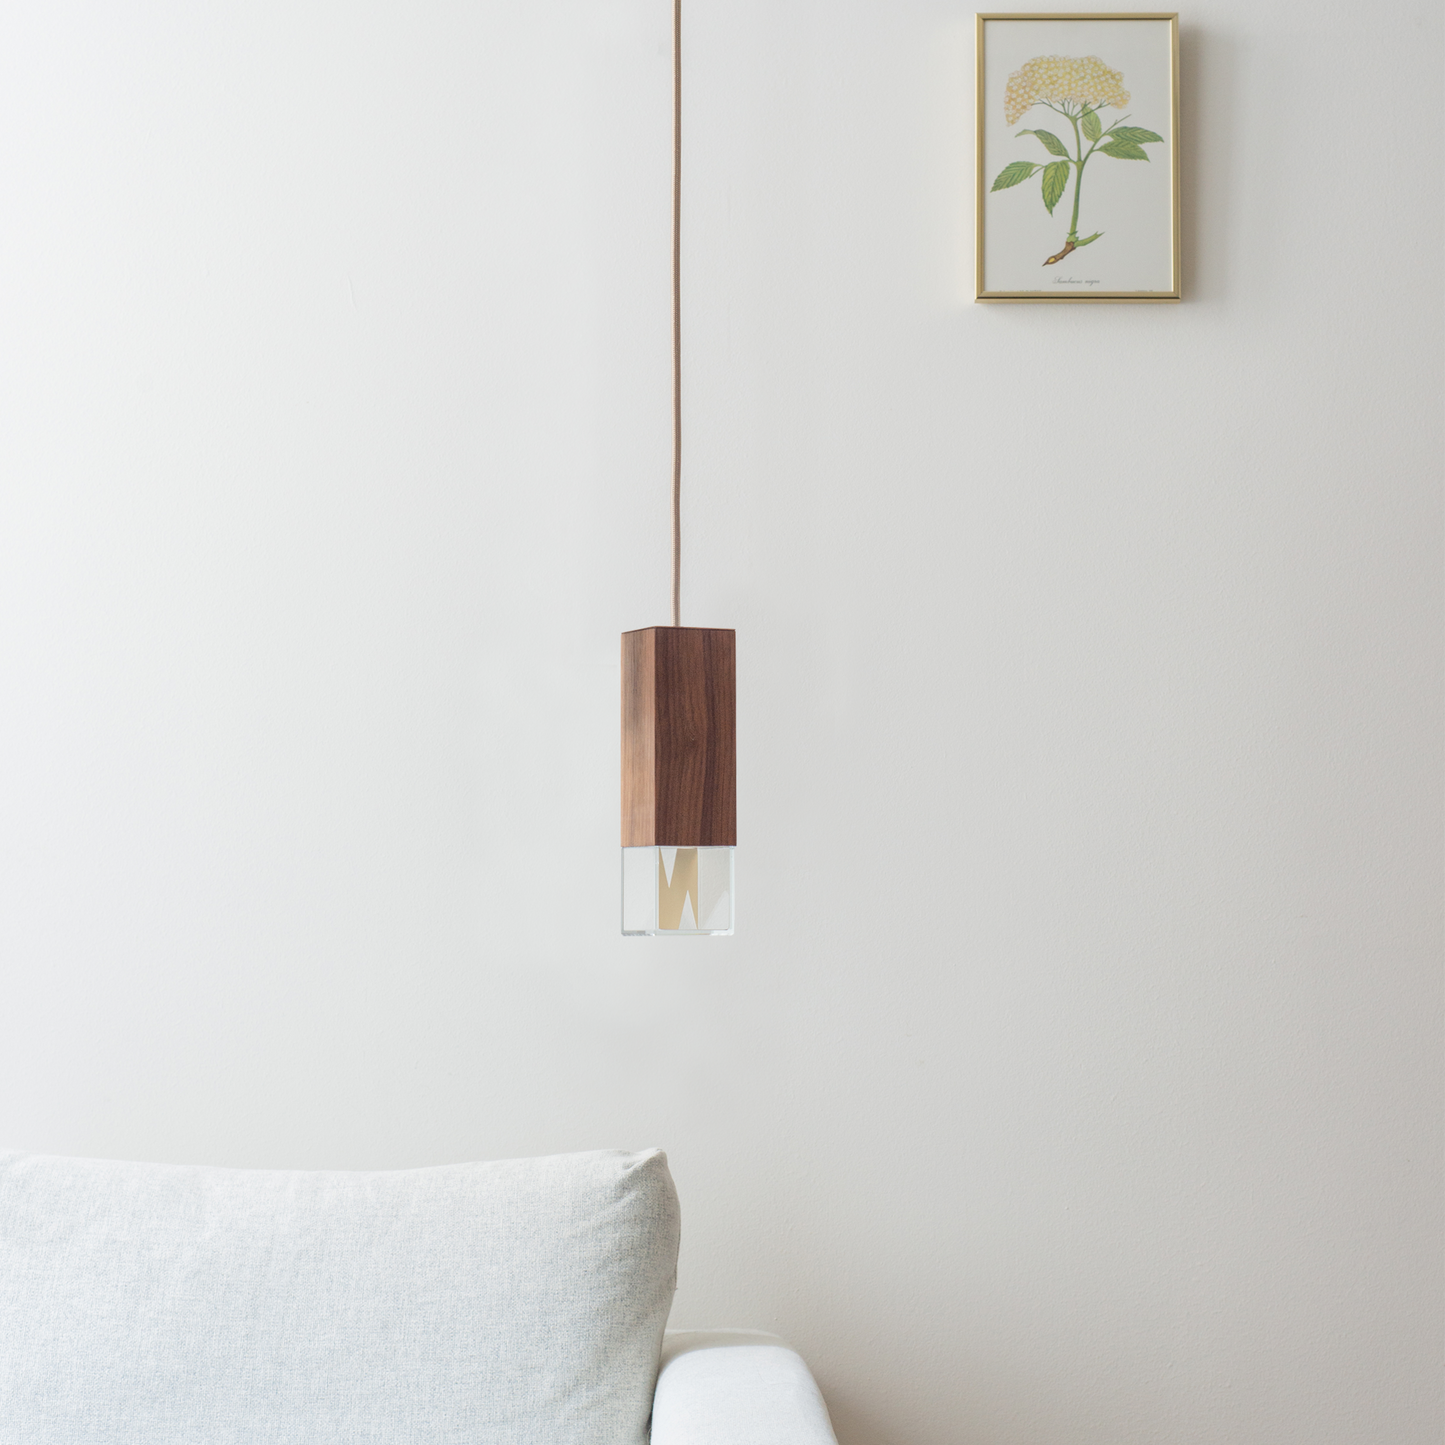 Lamp One Pendant Light / Wood, hanging from ceiling in living room setting.